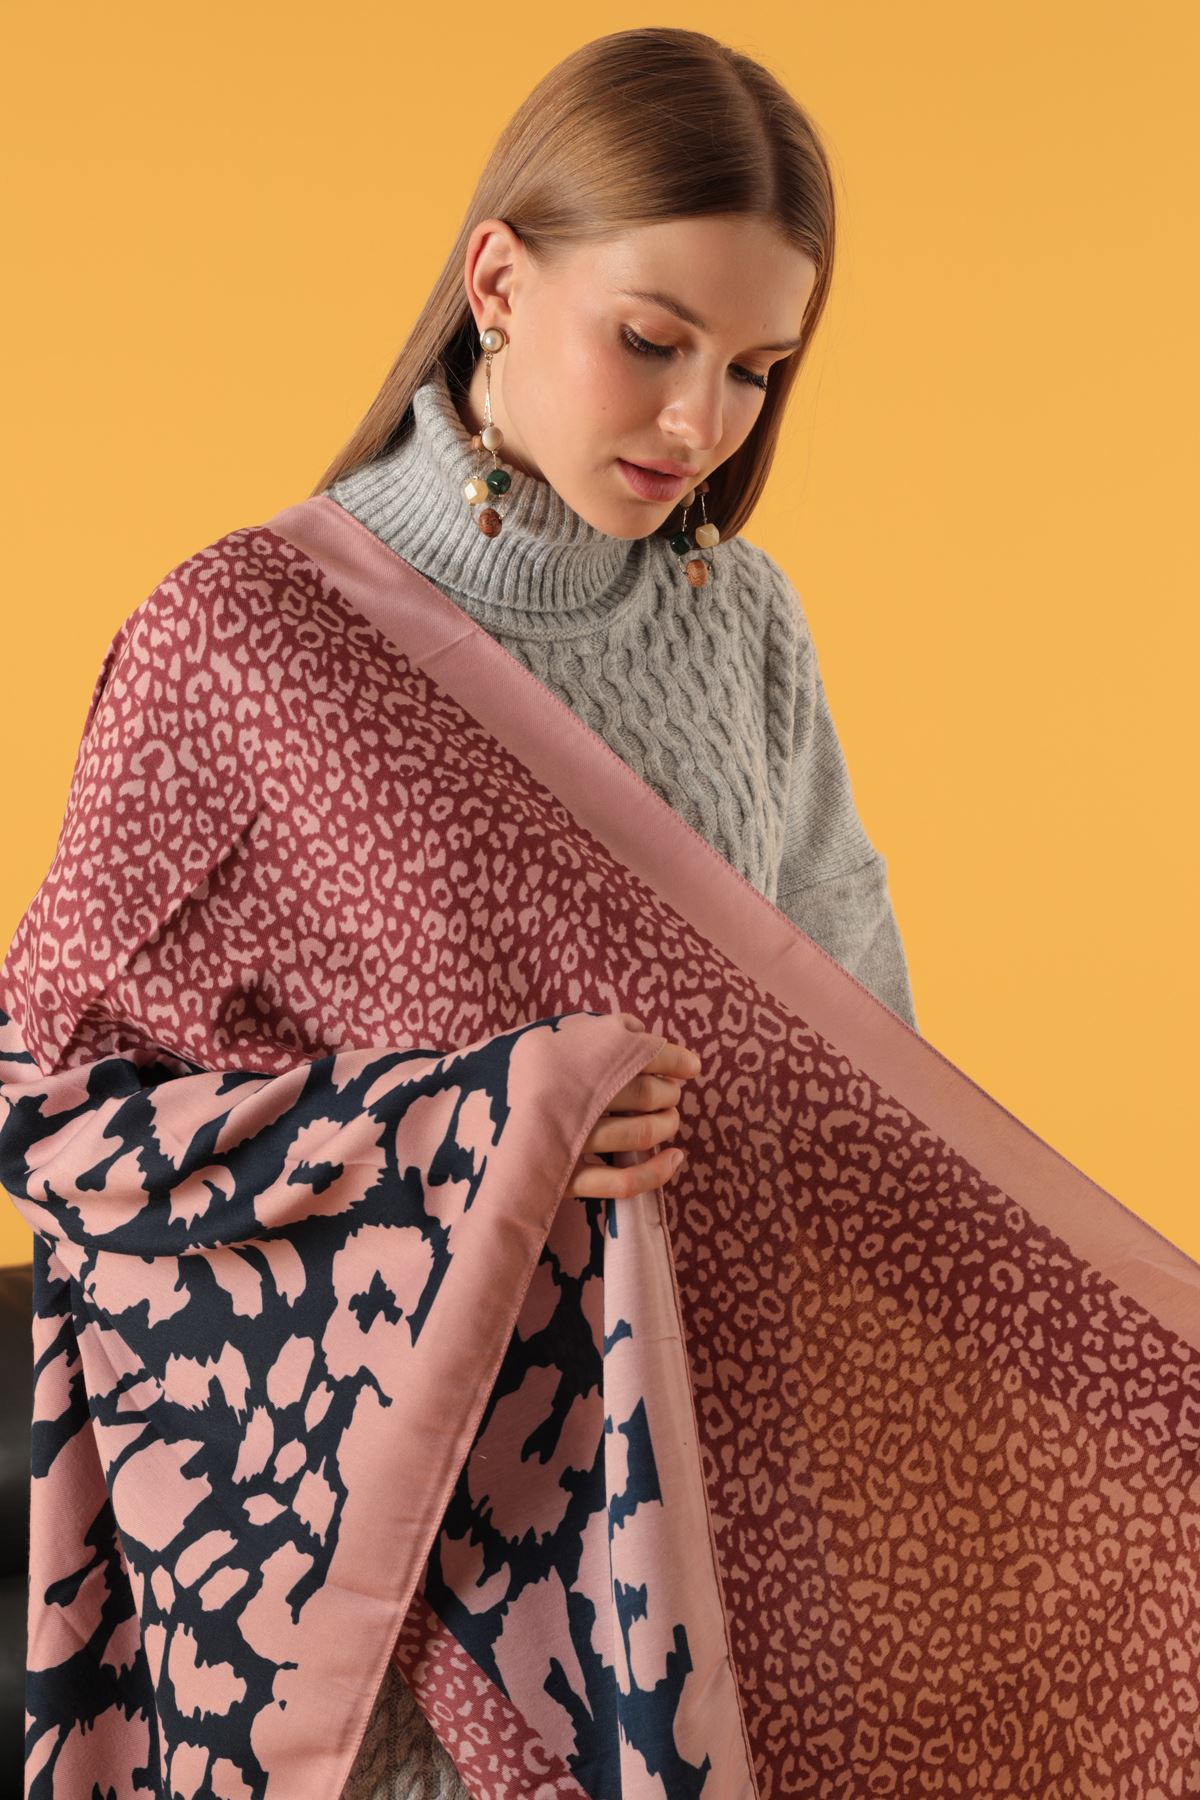 A model wears KAM11738 - Patchwork Leopard Patterned Women's Shawl - Pink, wholesale Shawl of Kaktus Moda to display at Lonca